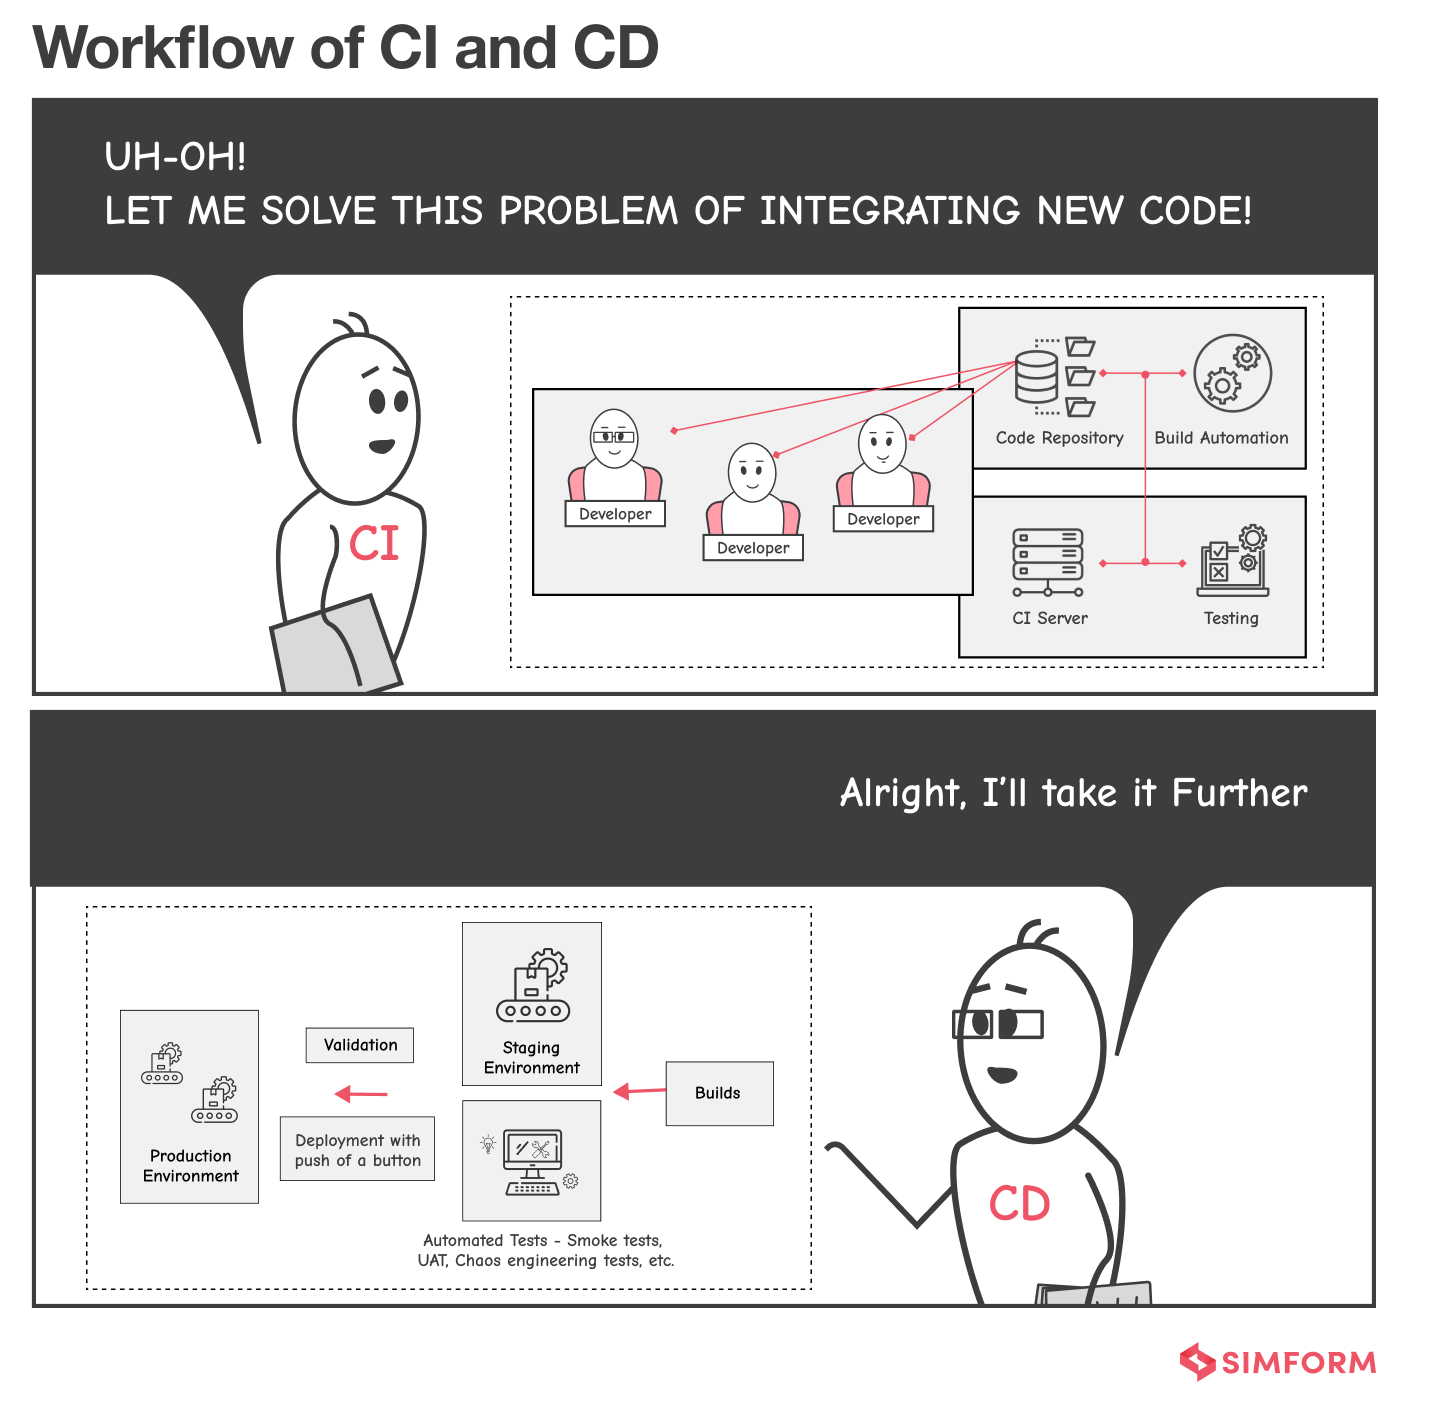 Workflow of CI and CD